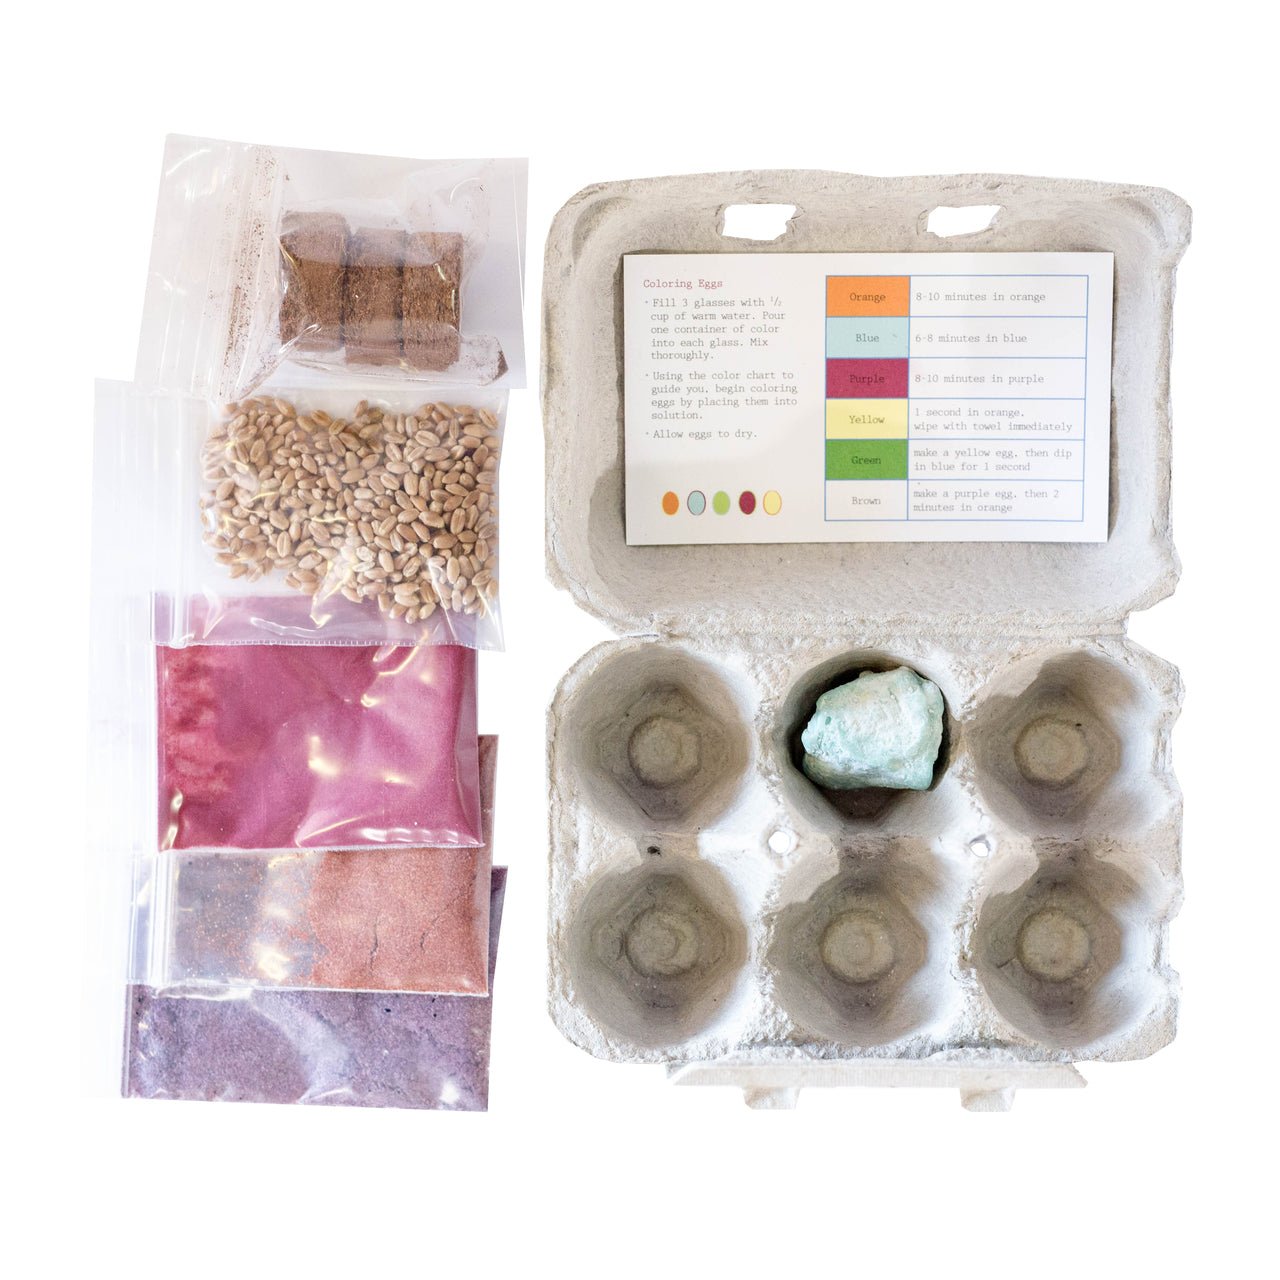 Eco-Kids Eco-Eggs Coloring and Grass Growing Kit